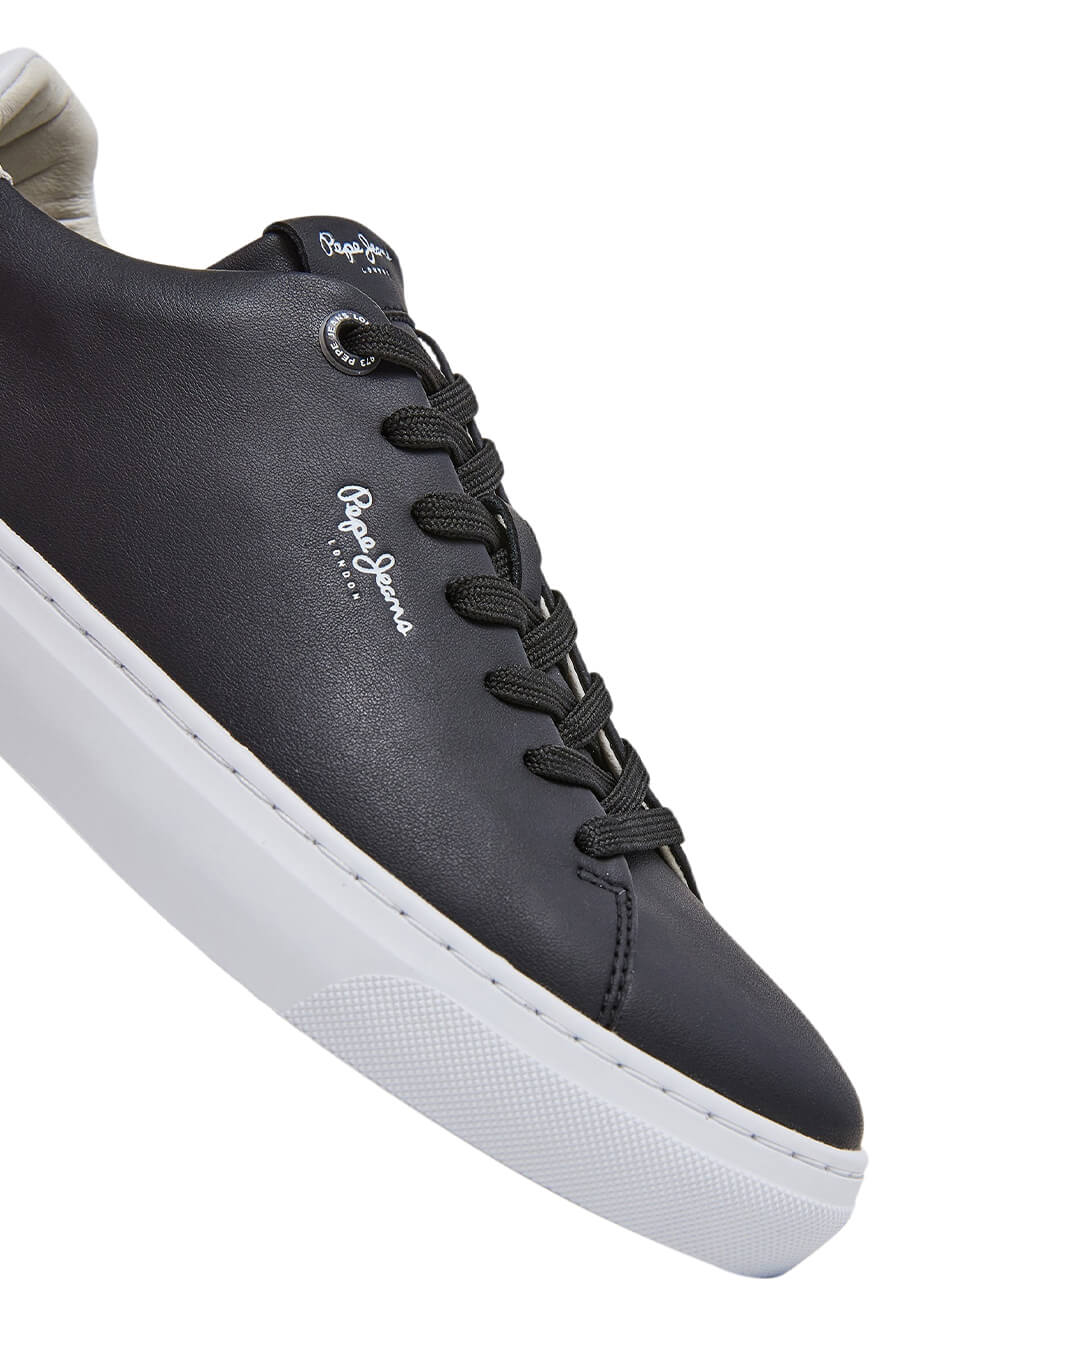 Pepe Jeans Shoes Pepe Jeans Black Camden Leather Sneakers